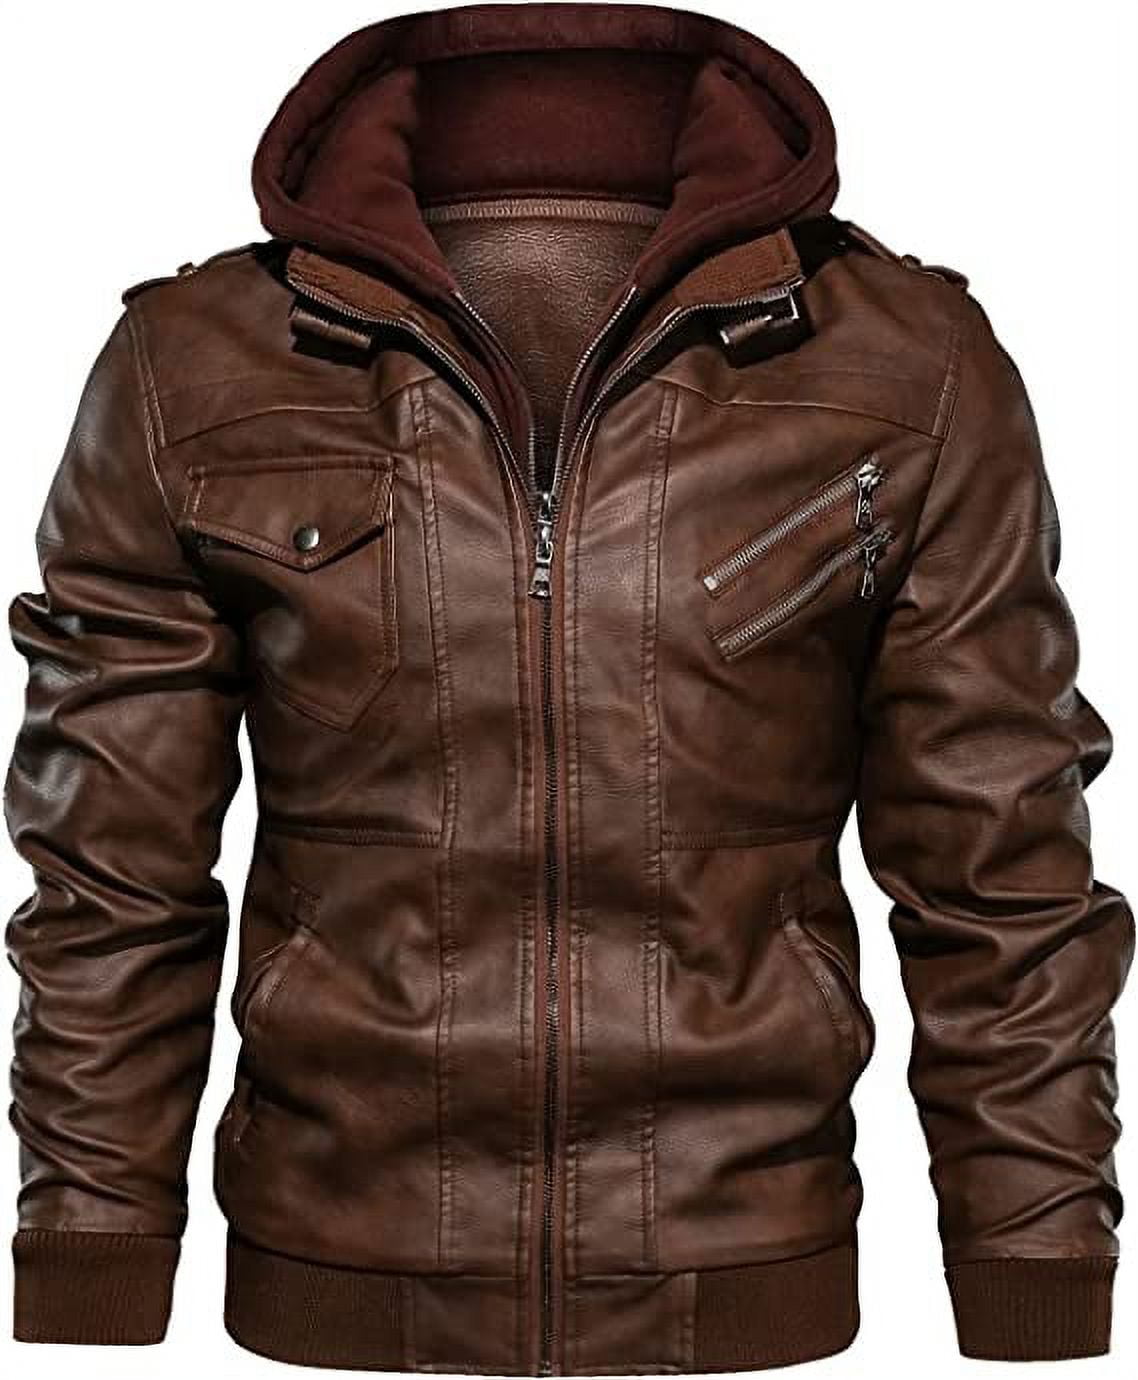 Motorcycle Jacket for Men Casual Faux Leather Bomber Jacket with ...